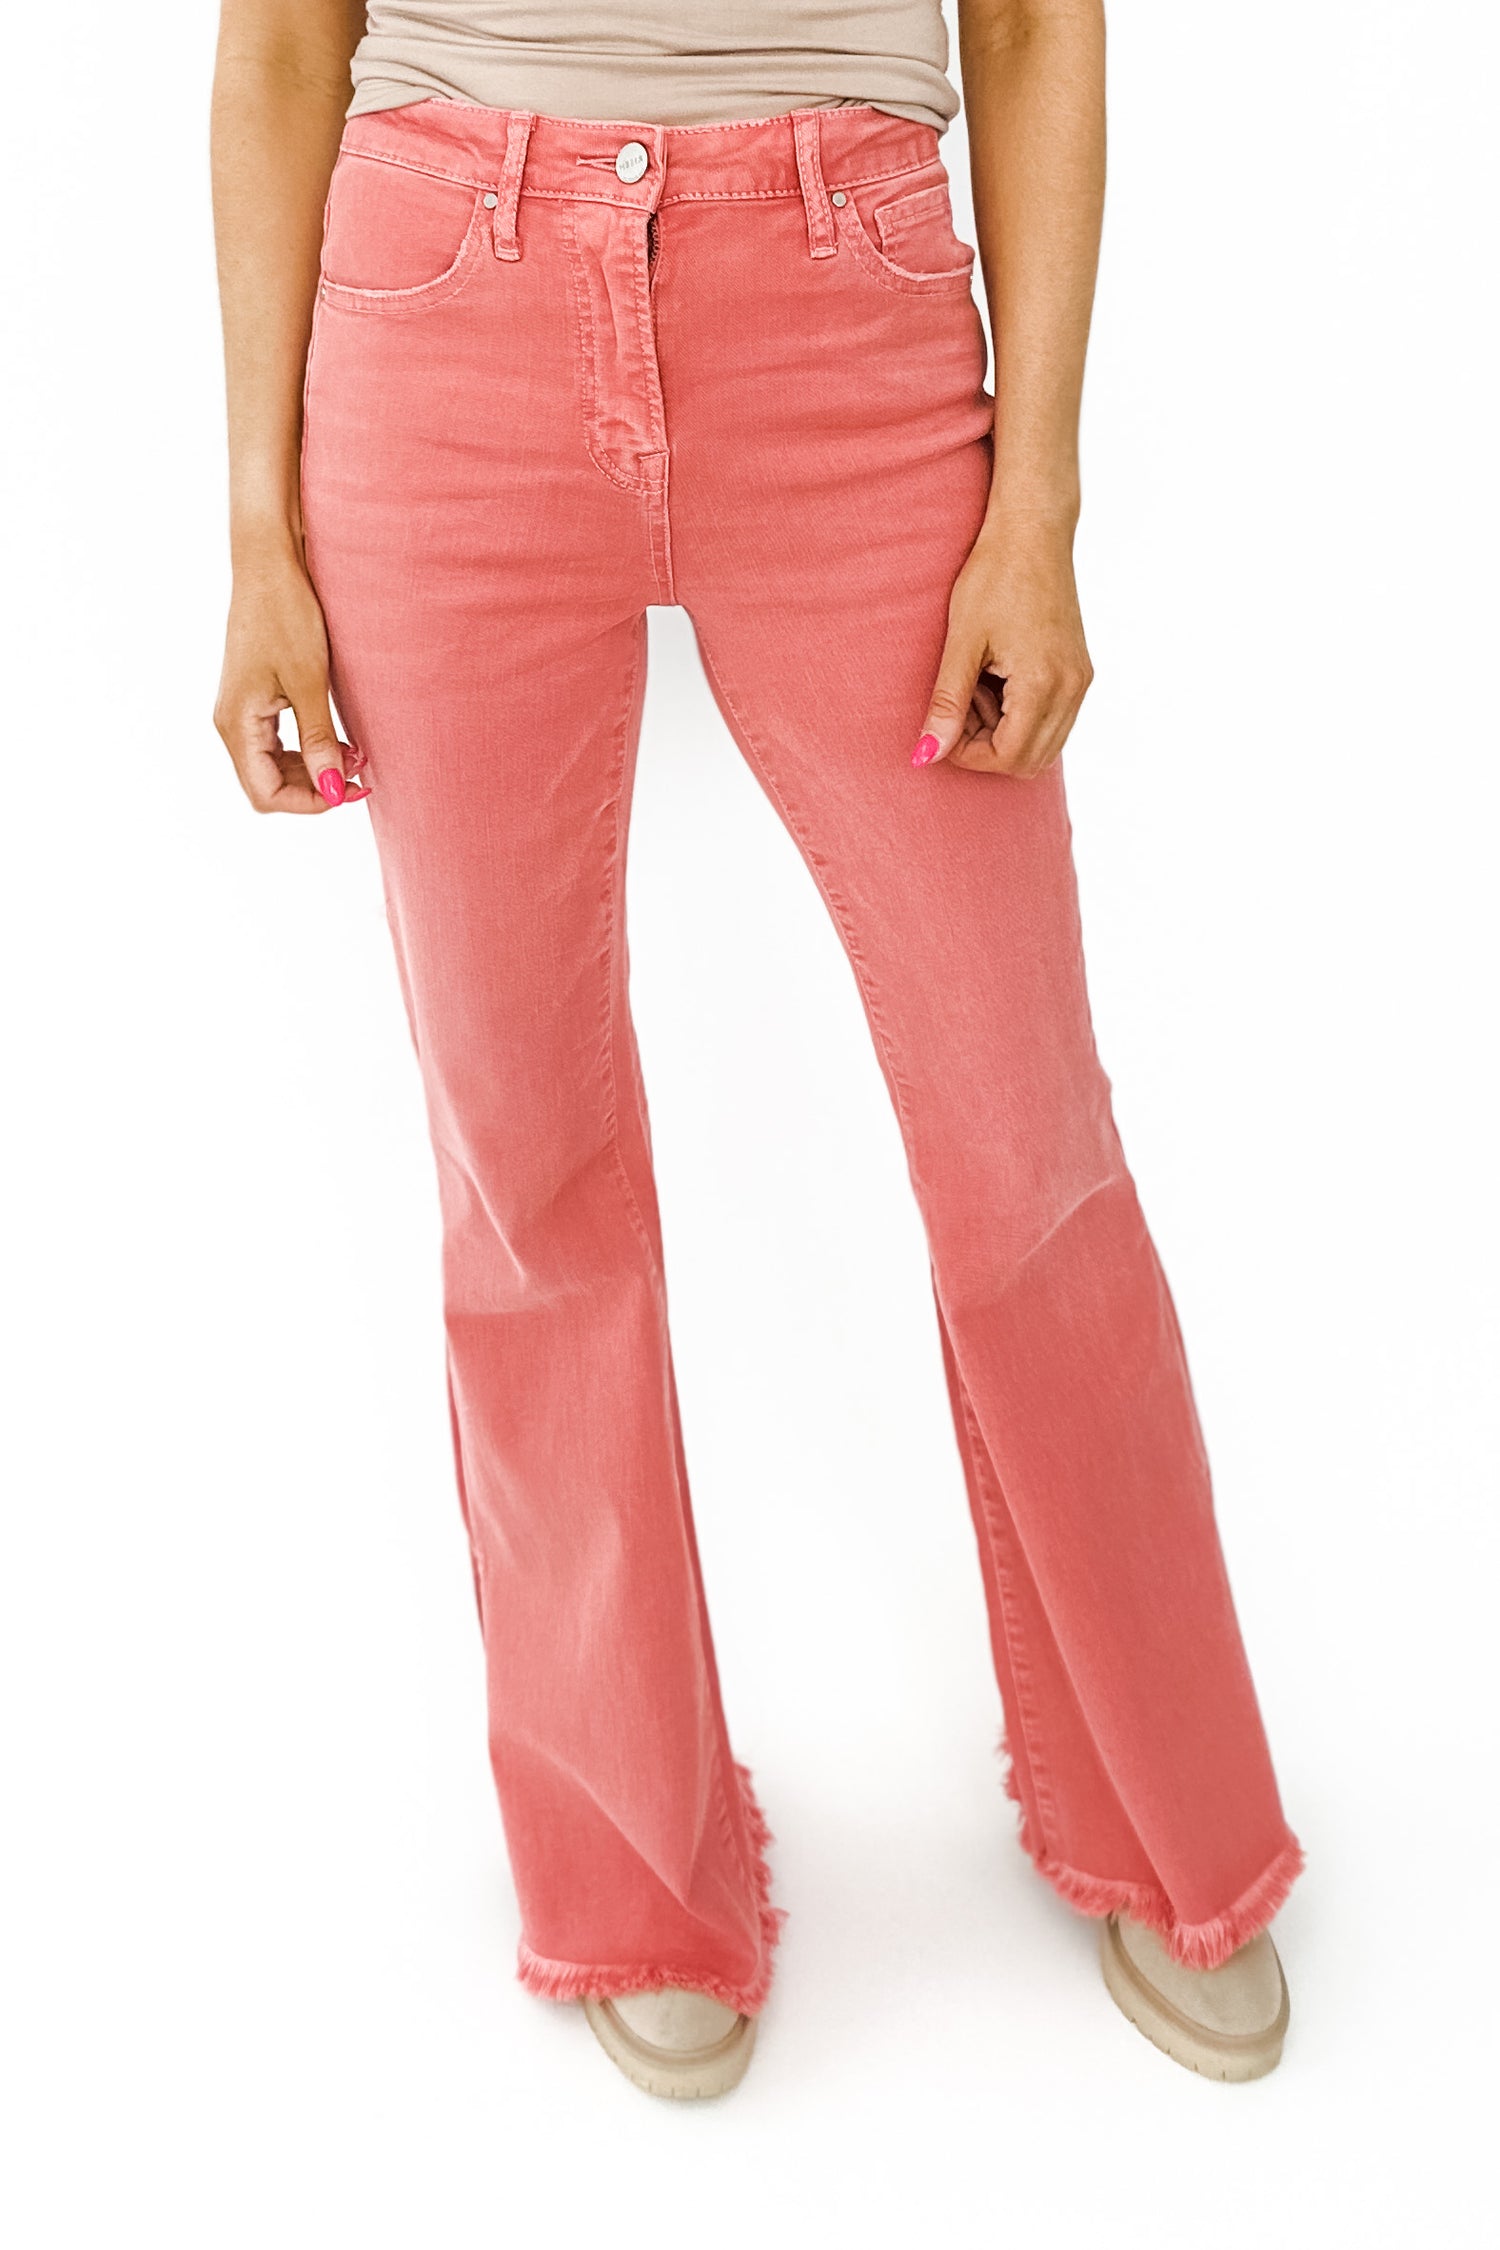 JUDD HIGH RISE FLARE JEANS BY RISEN